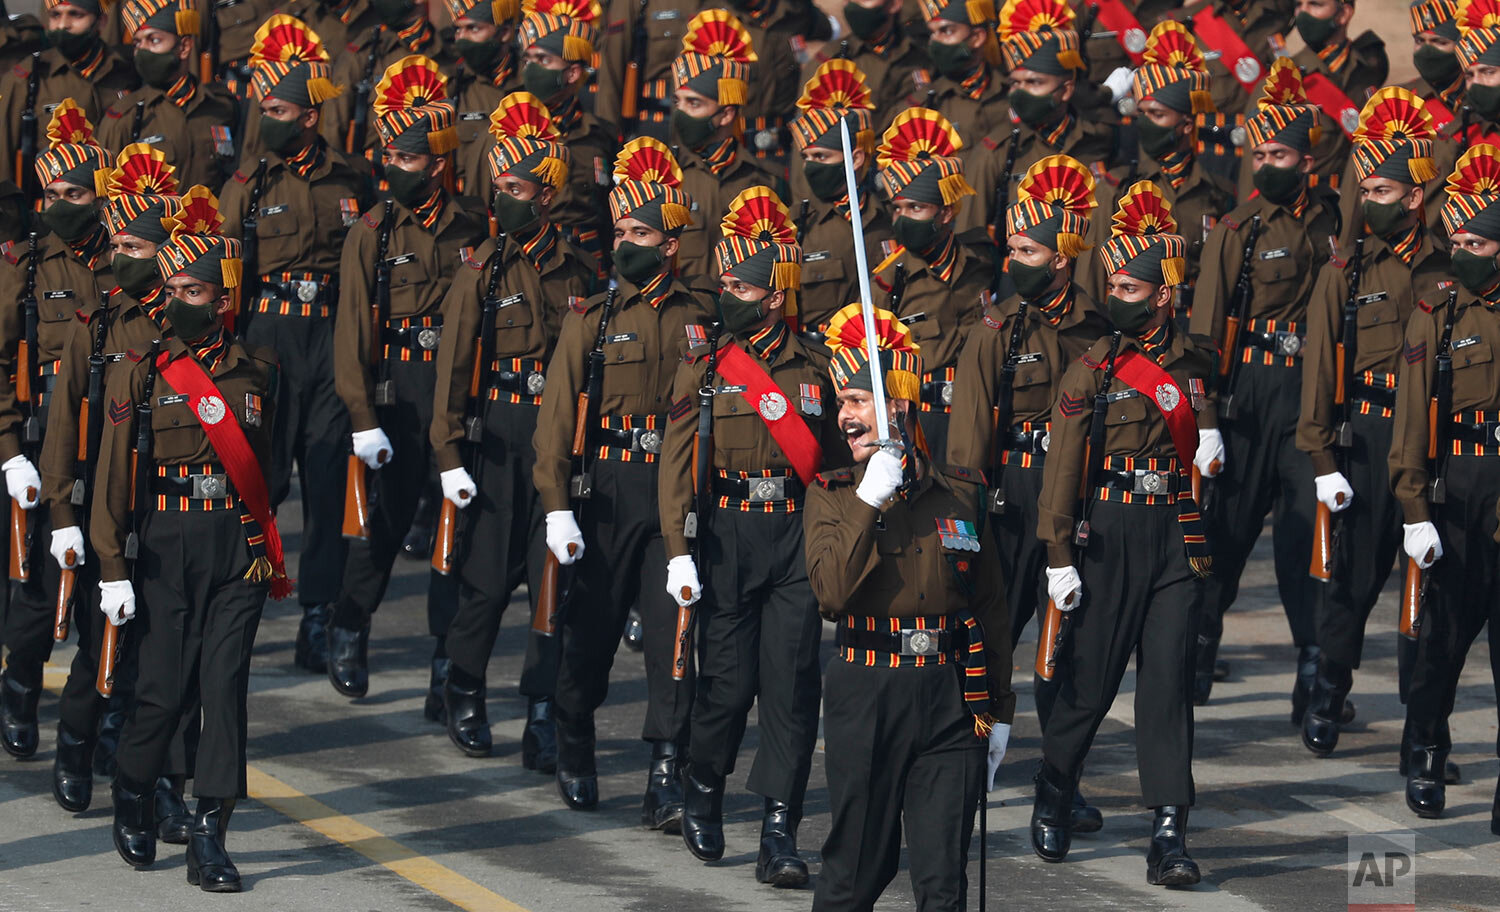  Indian army soldiers march through the ceremonial Rajpath boulevard during India's Republic Day celebrations in New Delhi, India, Tuesday, Jan. 26, 2021. AP Photo/Manish Swarup) 